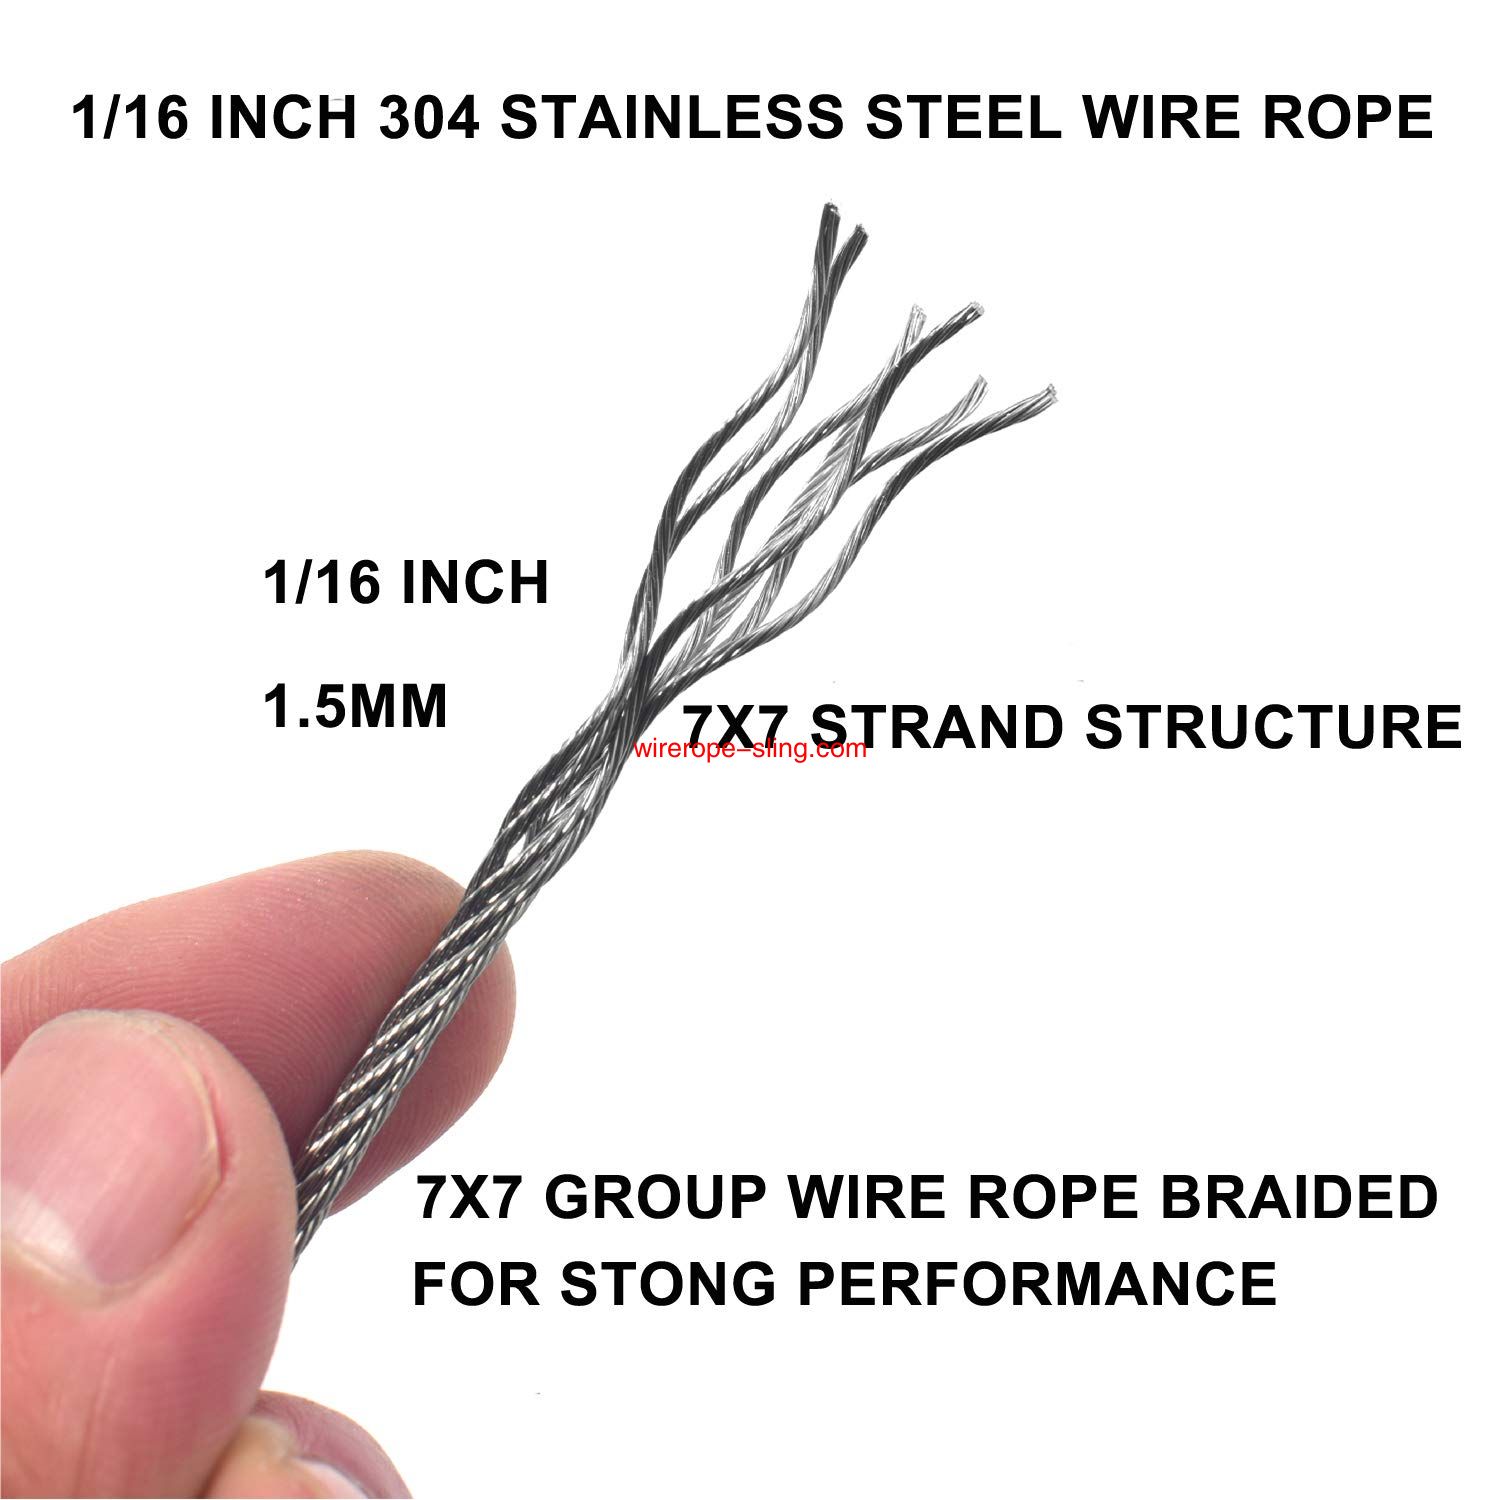 1 / 16 inch VINYL COATED steel rope Kit, 330 ft Stainless Steel 304 steel rope with 50 Aluminum sertissage Rings and 10 clamps